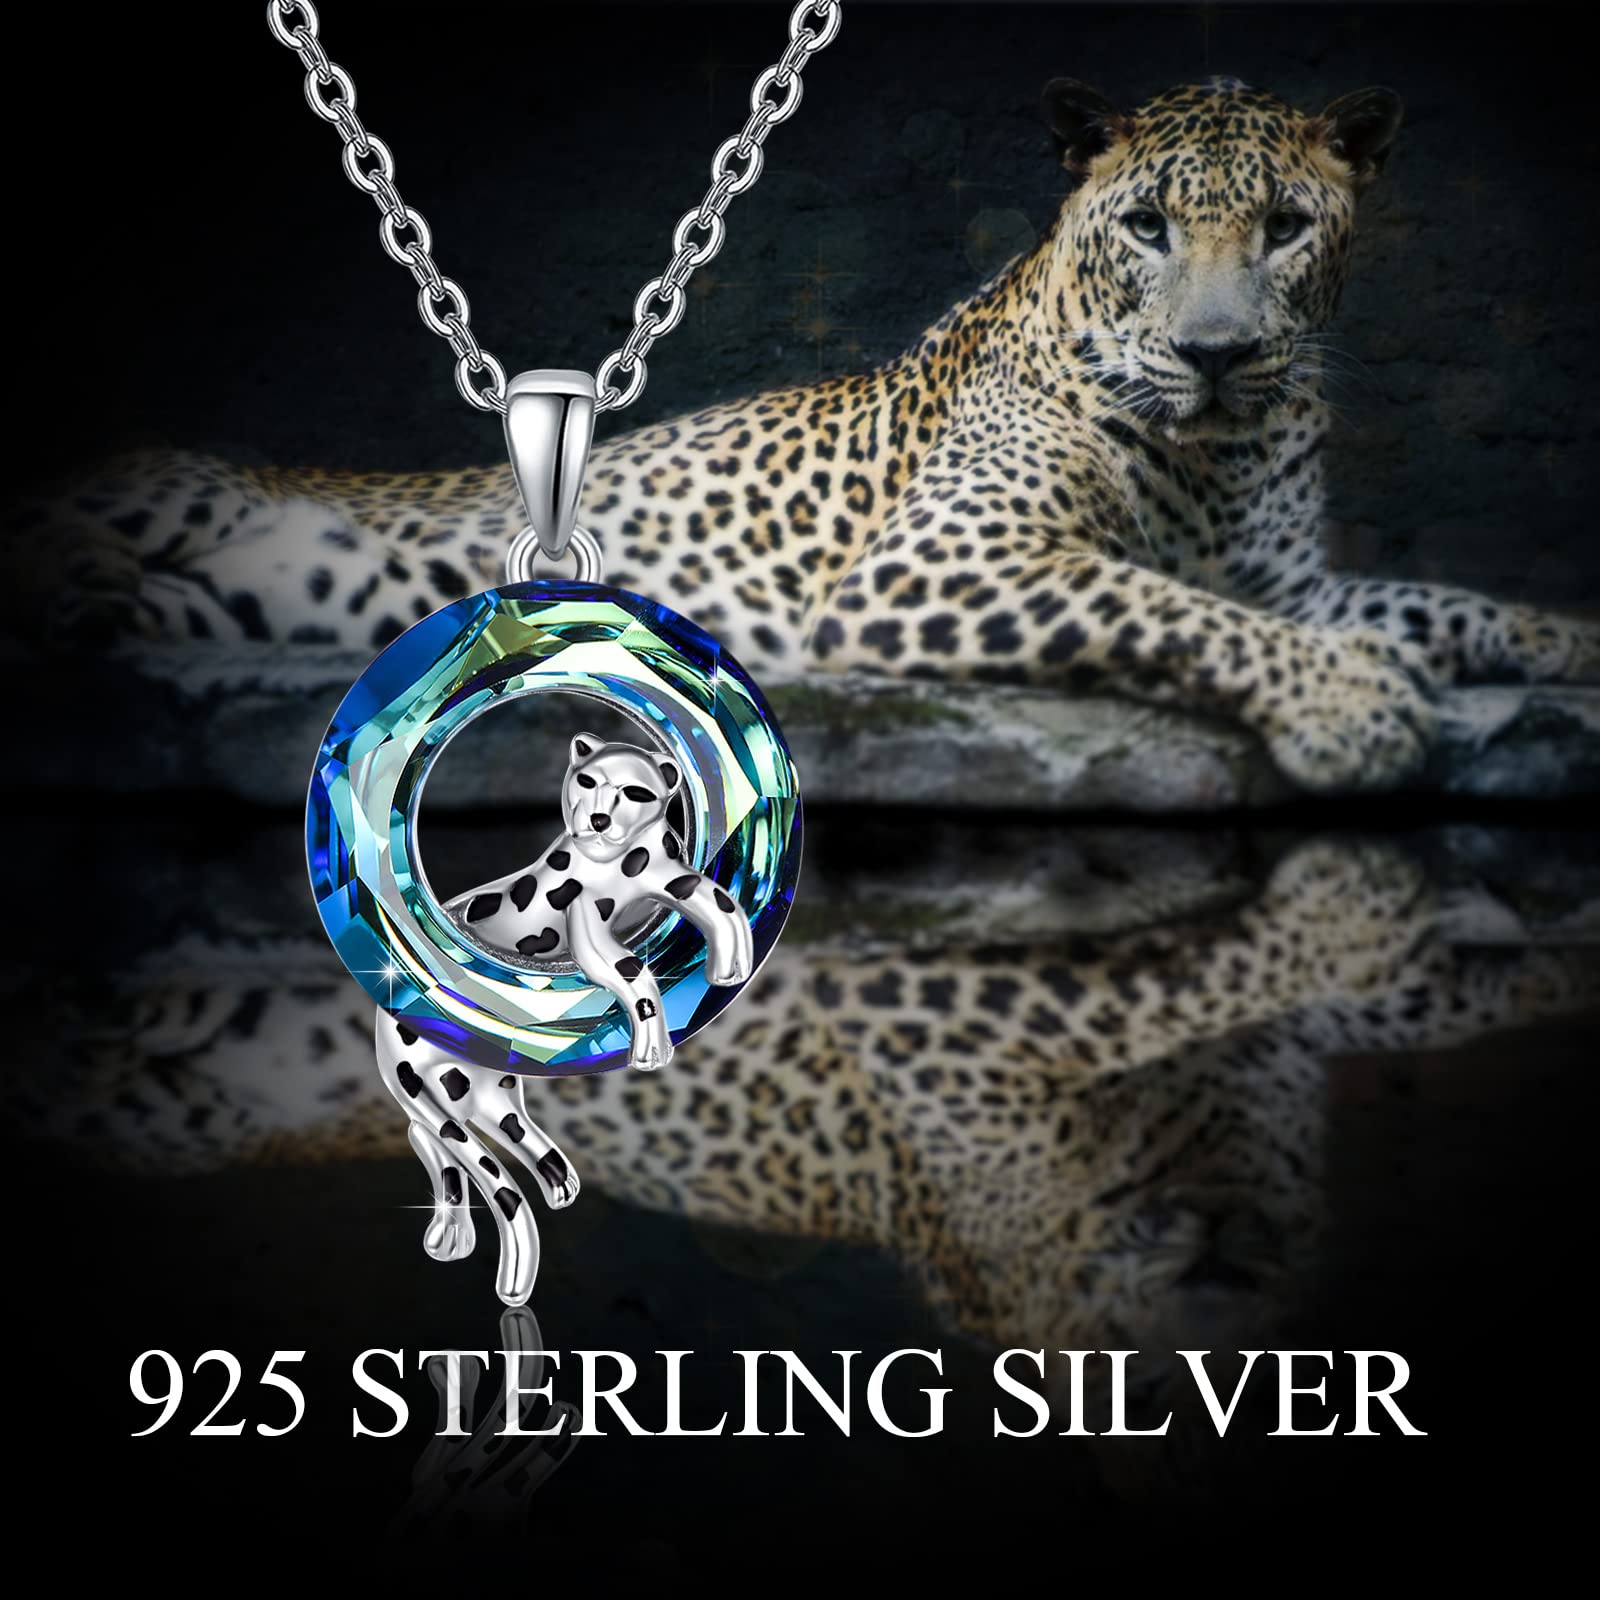 A Maramalive™ necklace with a Swarovski crystal and a cheetah.